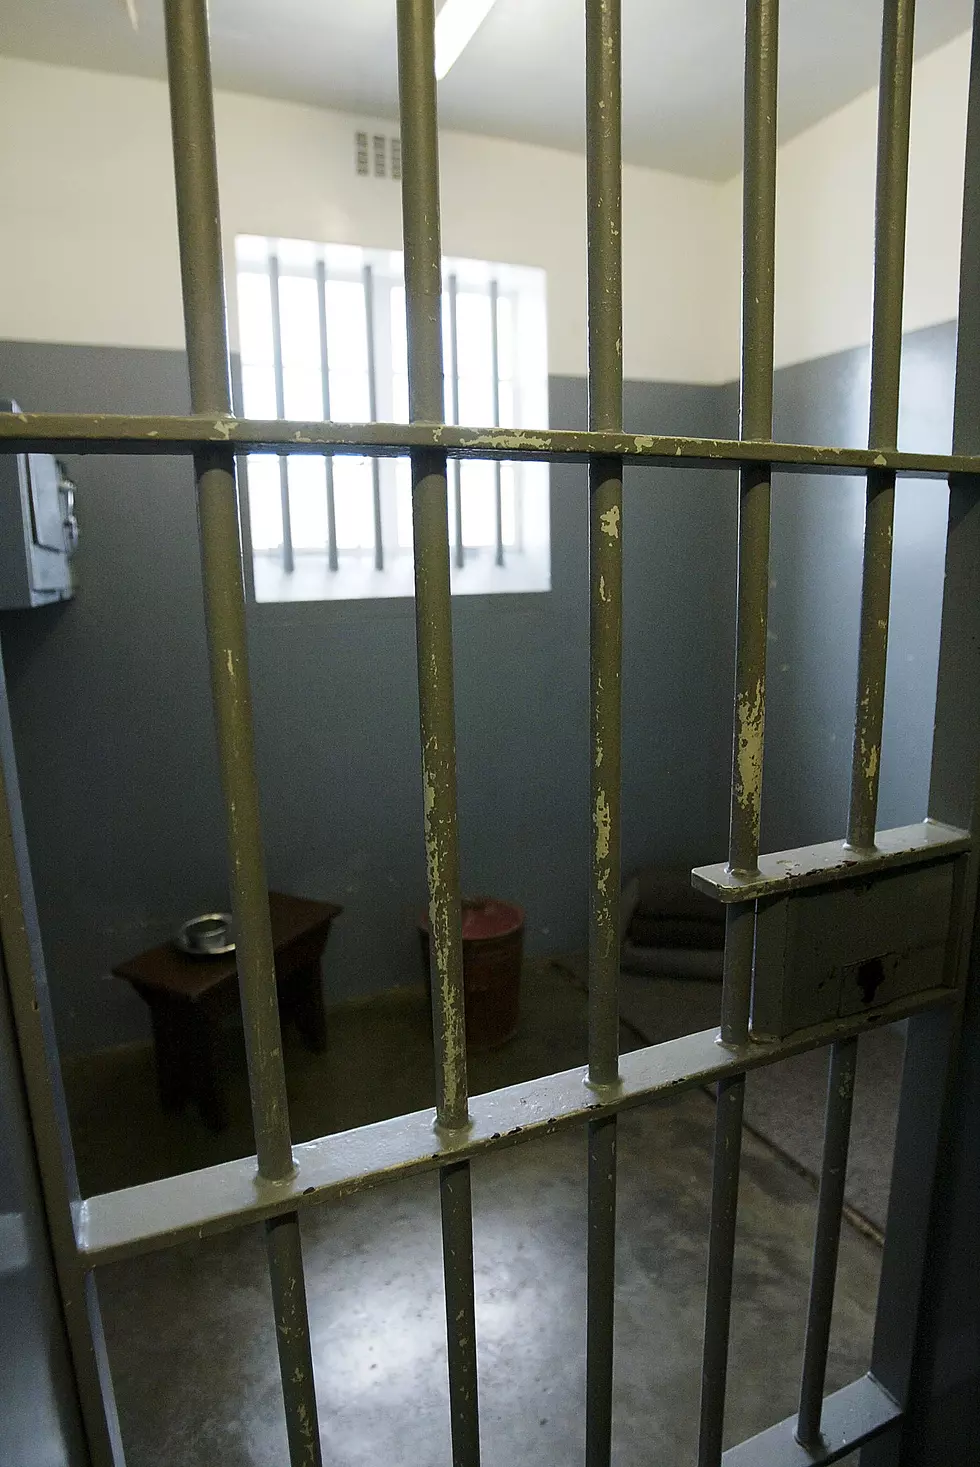 Nine Female Inmates Test Positive For Drugs In Jail